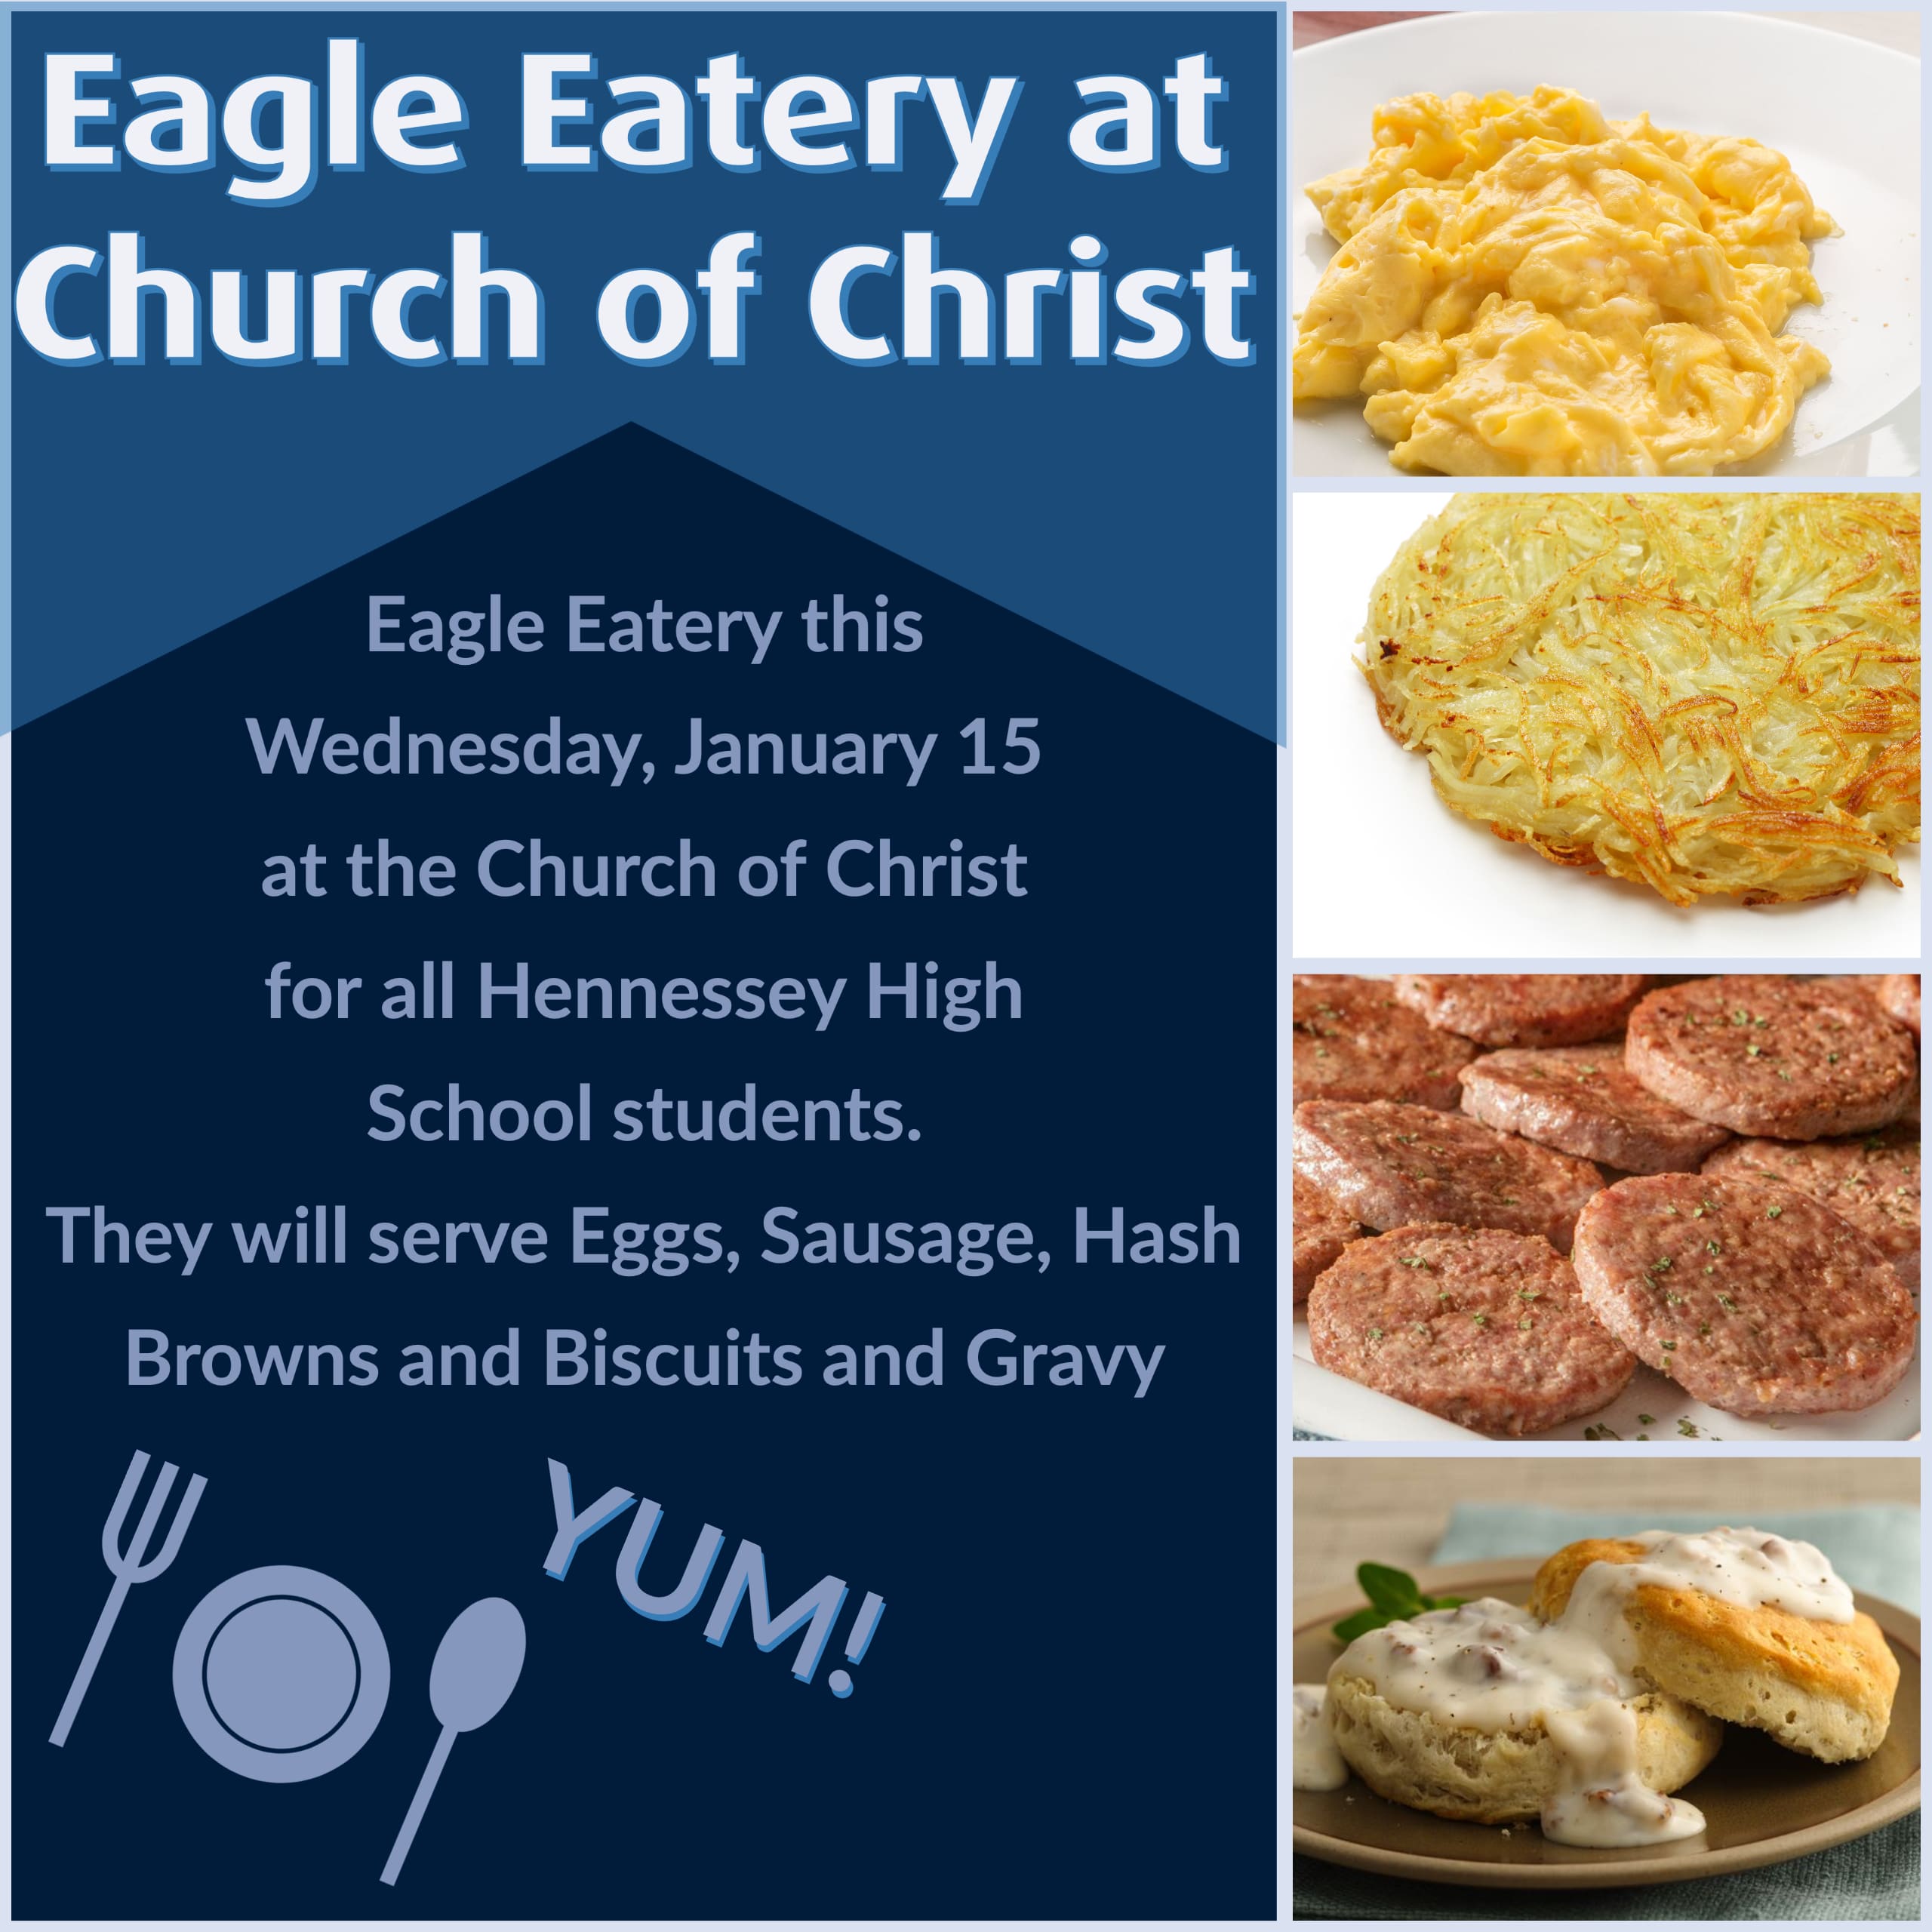 EAGLE EATERY THIS WEDNESDAY, JANUARY 15 AT CHURCH OF CHRIST FOR ALL HIGH SCHOOL STUDENTS